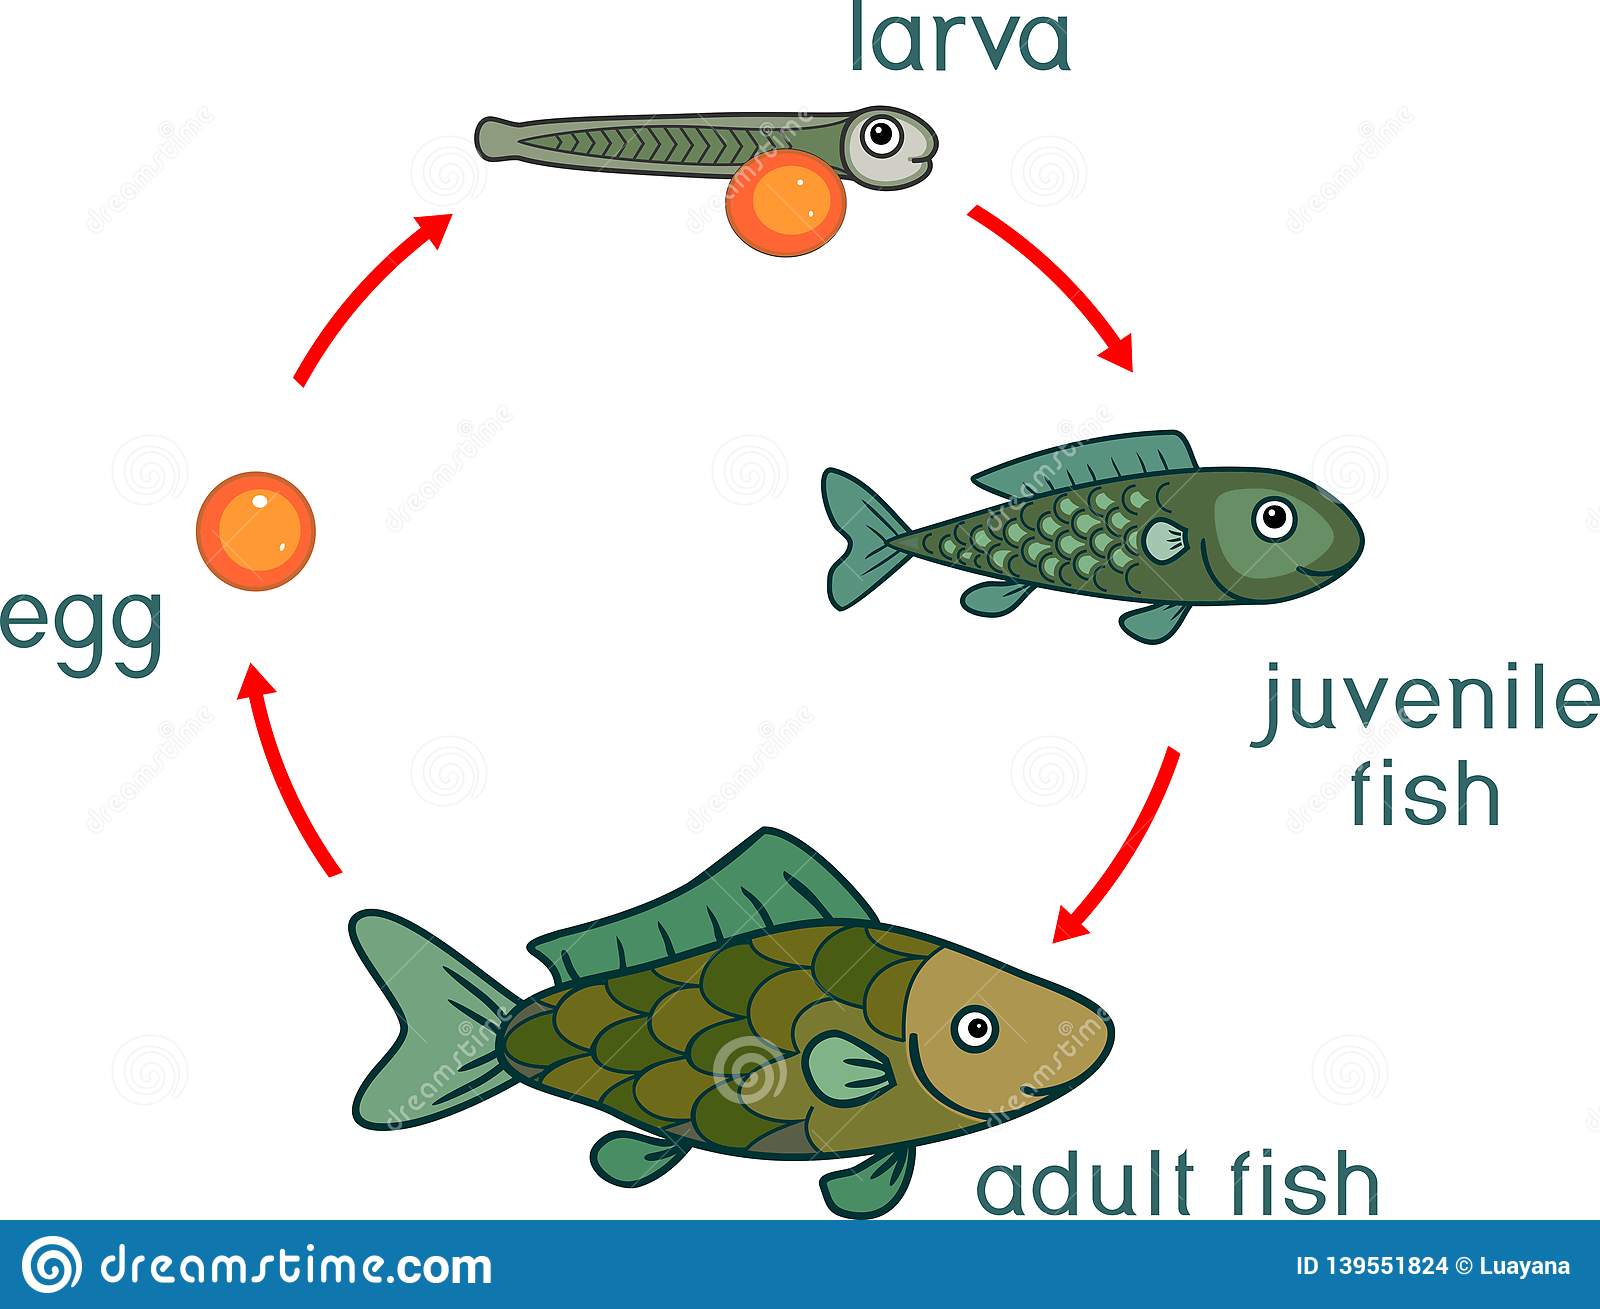 What is a fishing cycle?